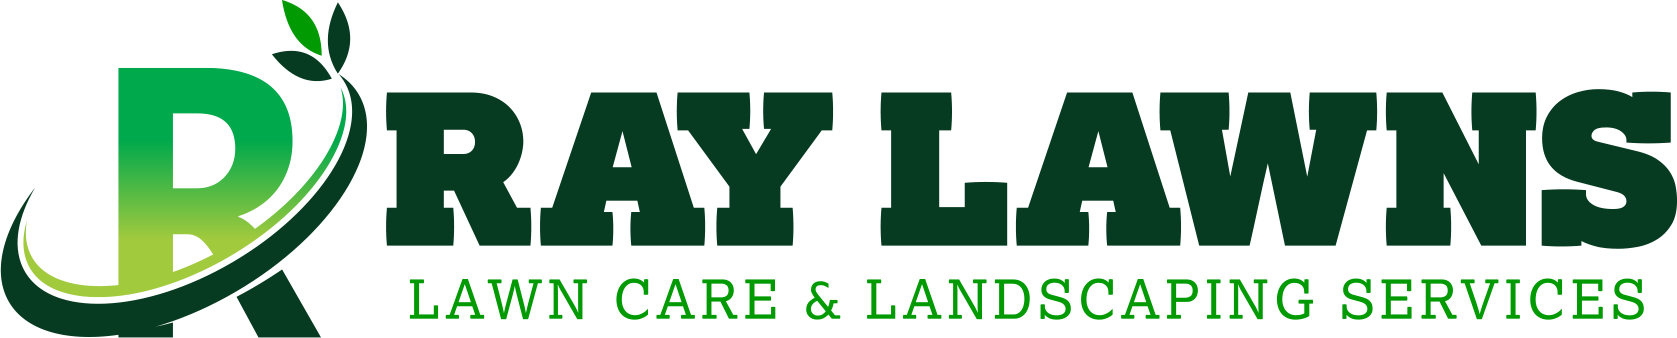 The Ray Lawns logo.